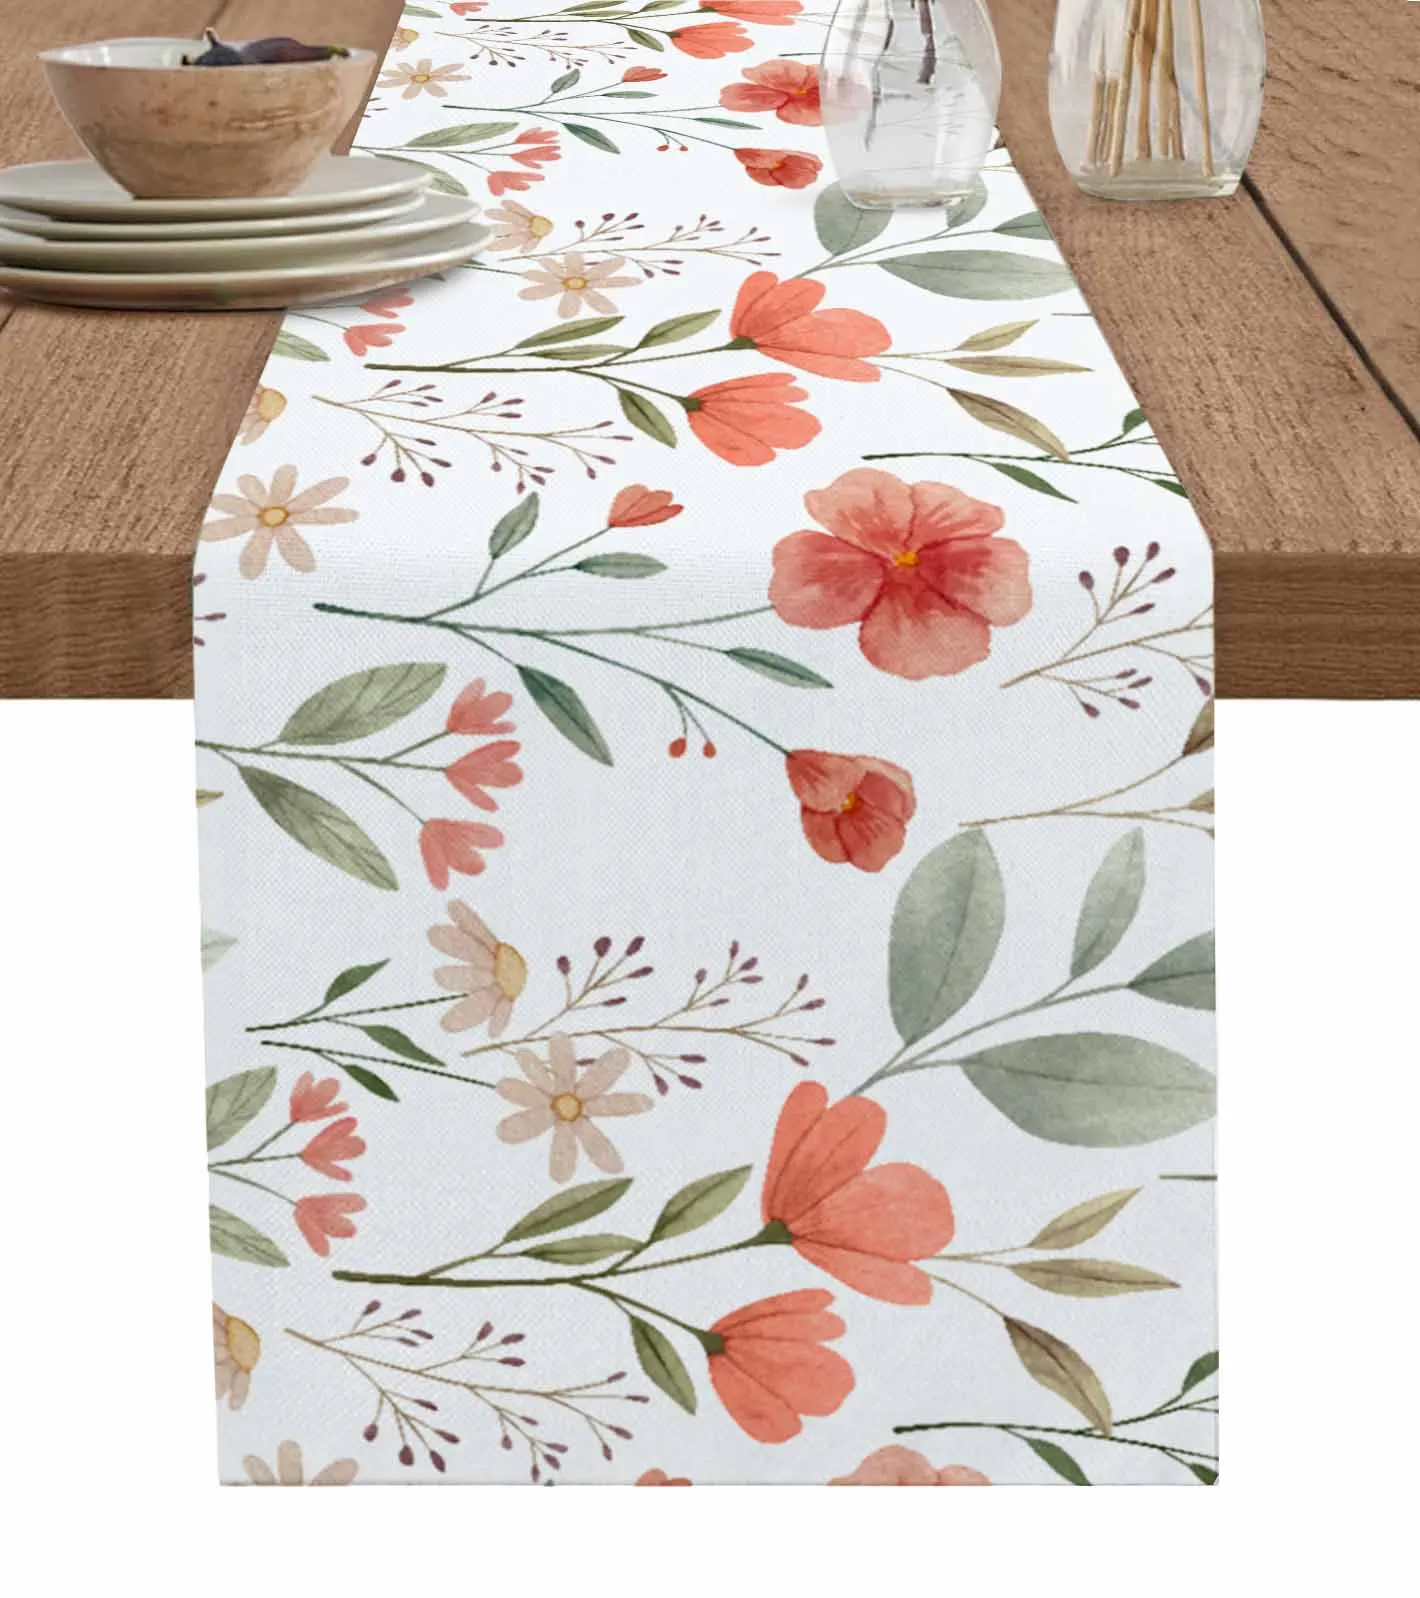 

Pastoral Plants Flowers Watercolor Table Runner Luxury Wedding Decor Table Runner Home Dining Holiday Decor Tablecloth